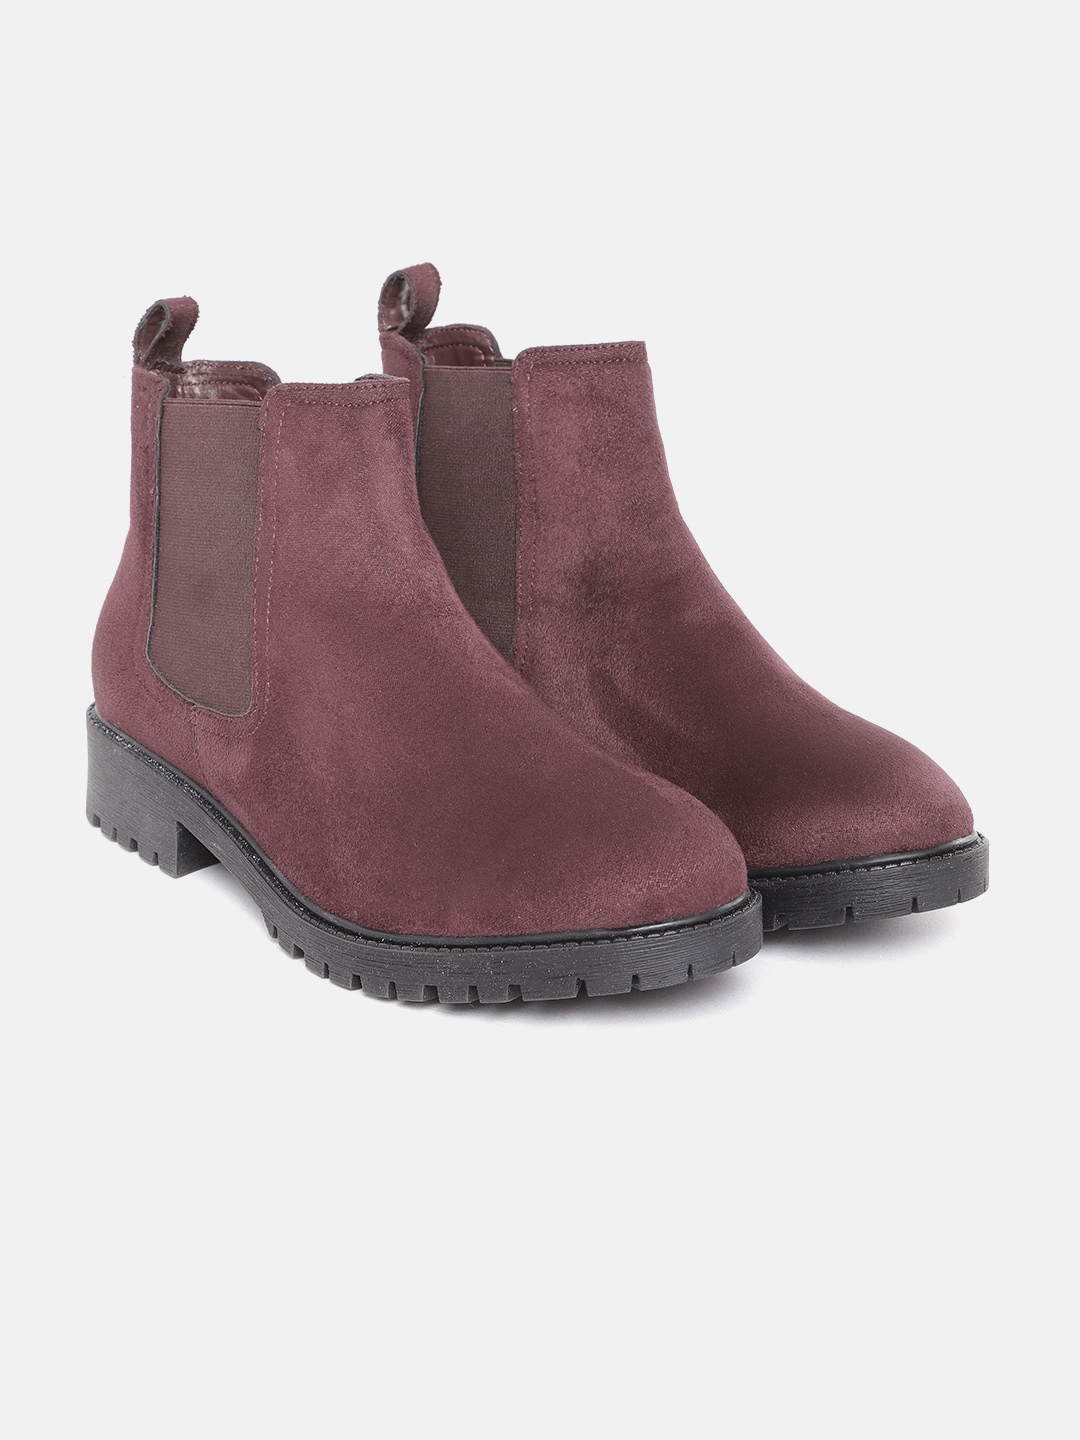 DressBerry Women Burgundy Suede Finish Flat Boots Price in India